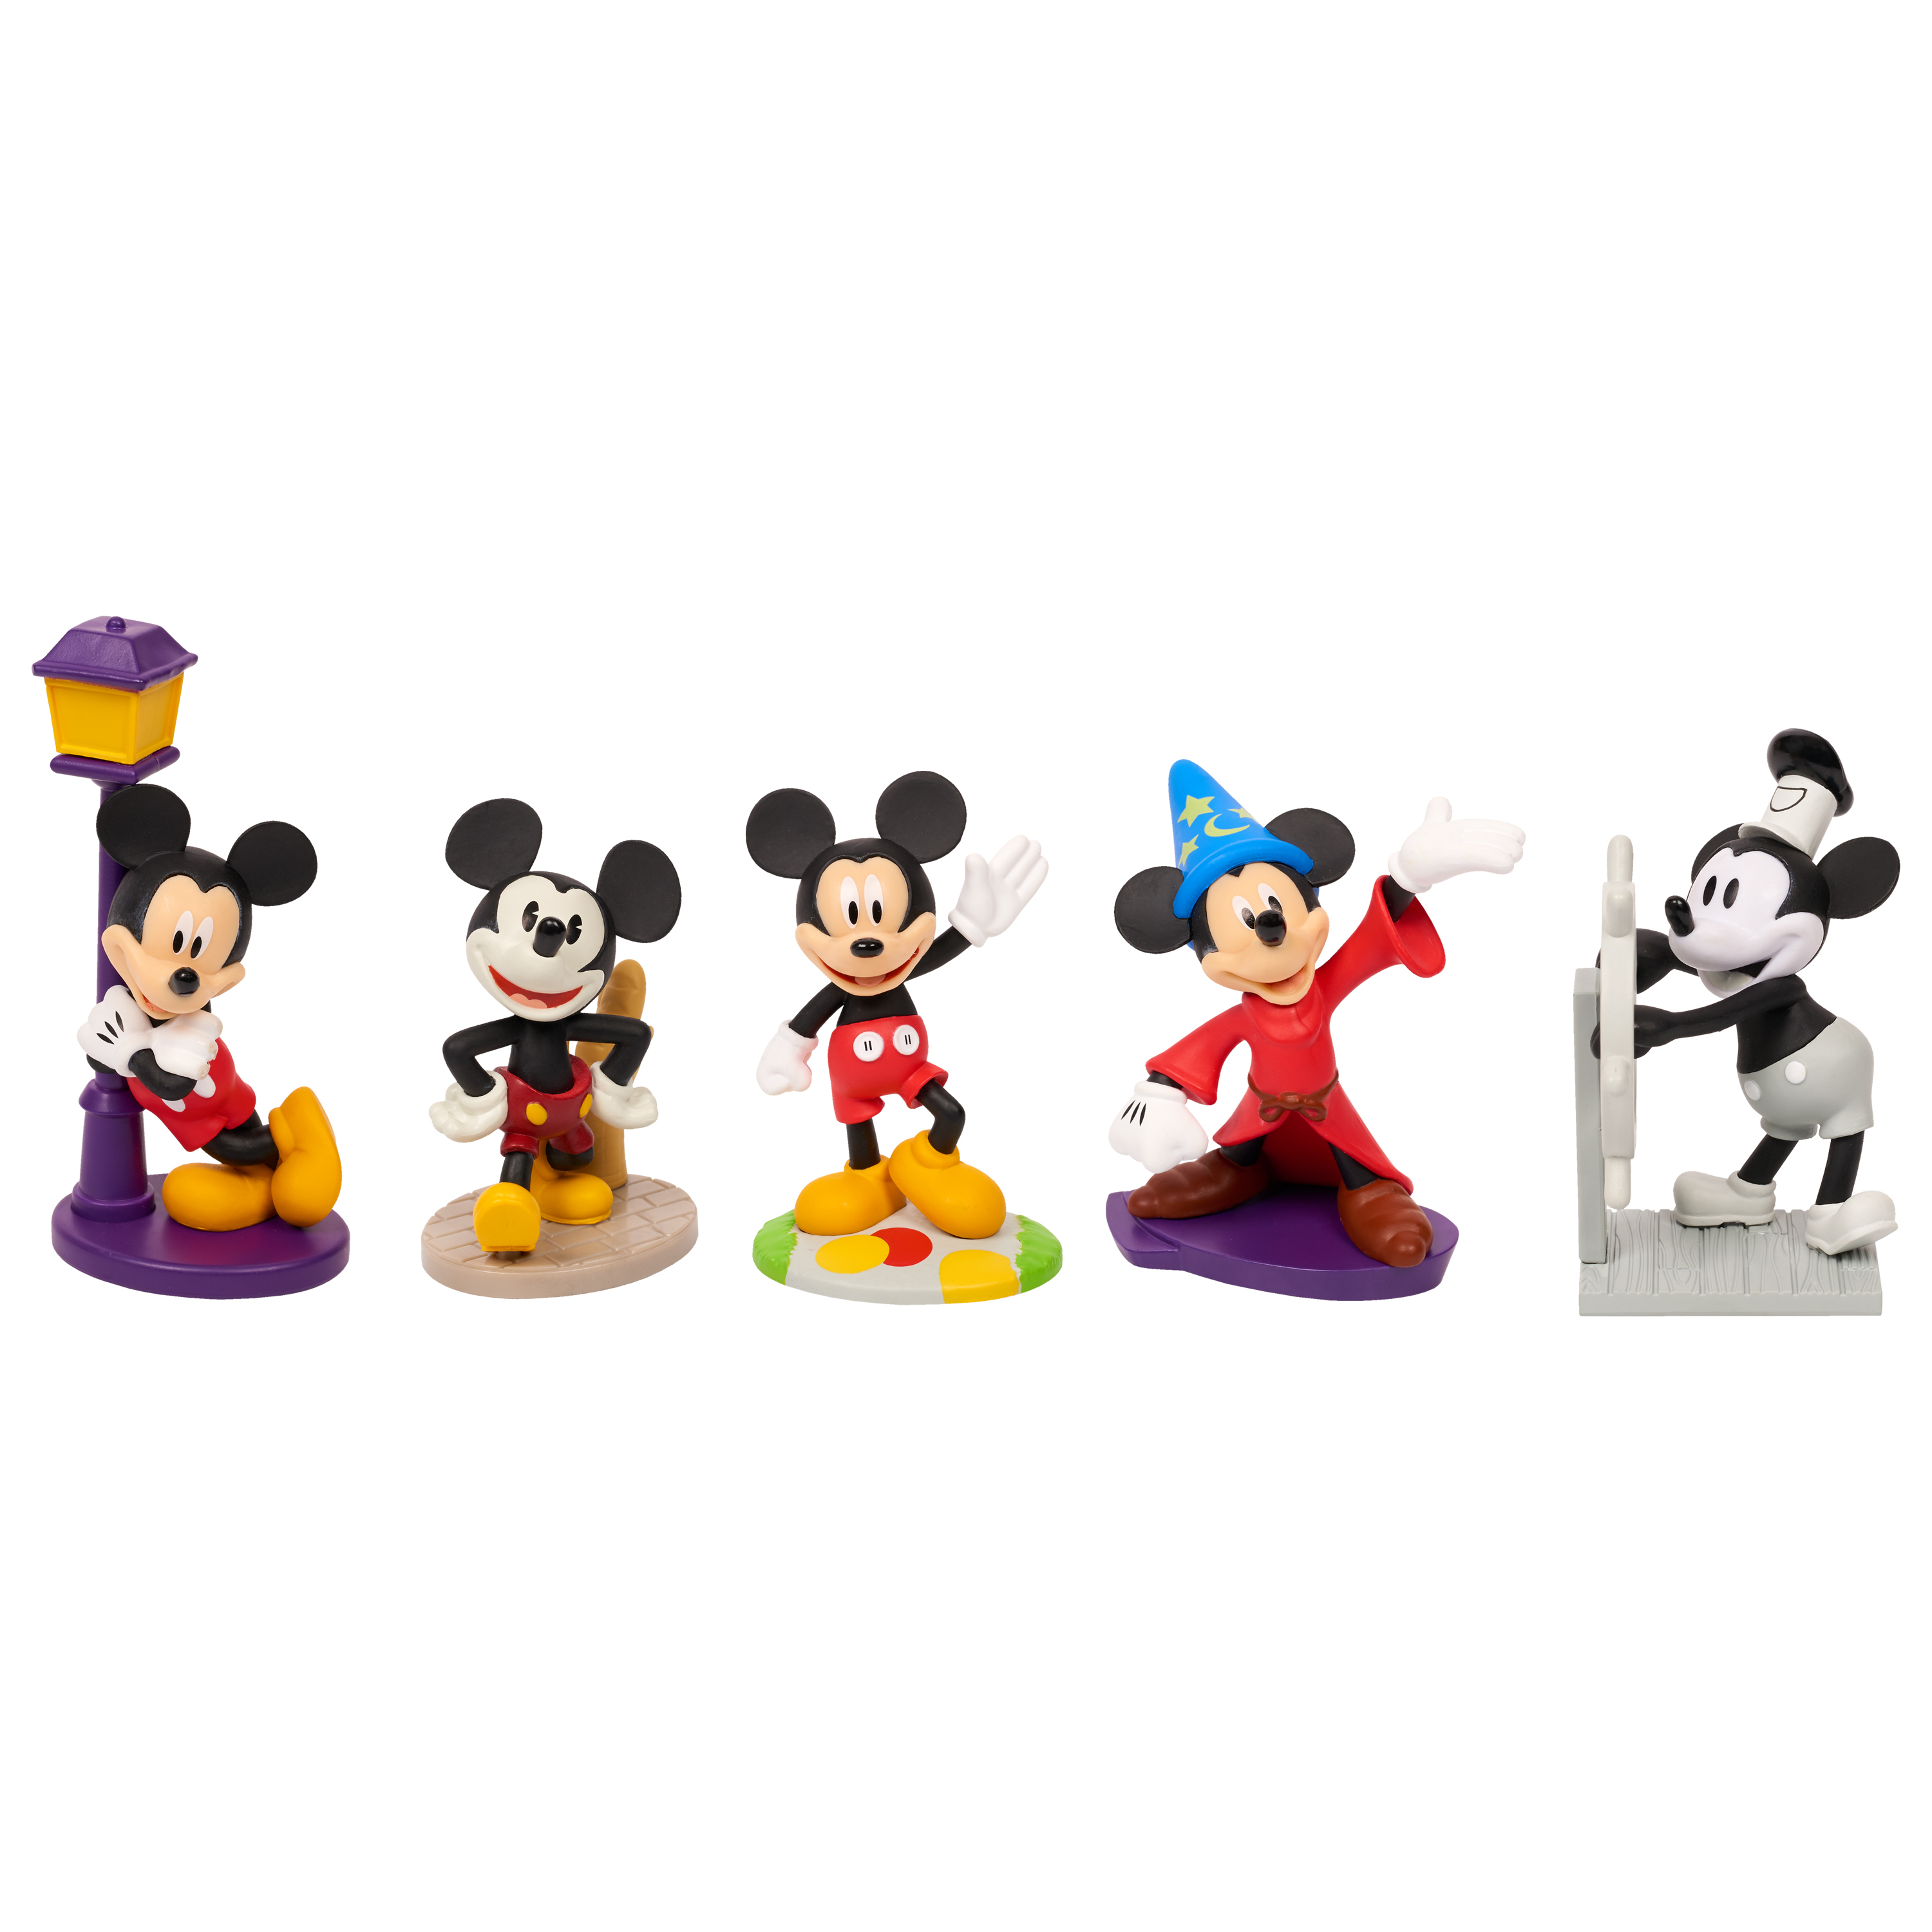 Mickey Mouse 90th Anniversary 5-Piece Collectible Figure Set - image 1 of 7